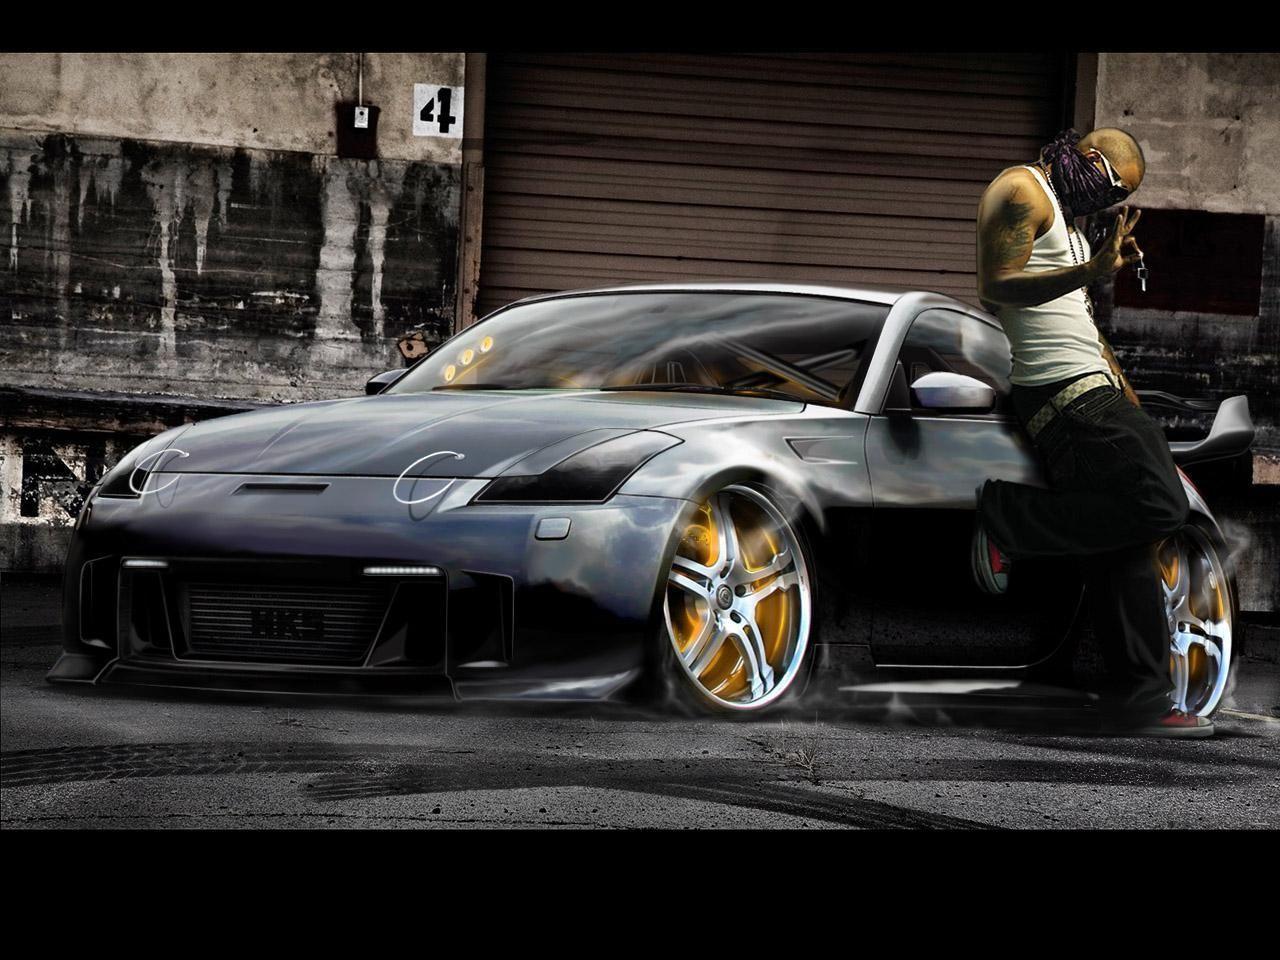 Cars: Nissan 350z Tuning, picture nr. 40070